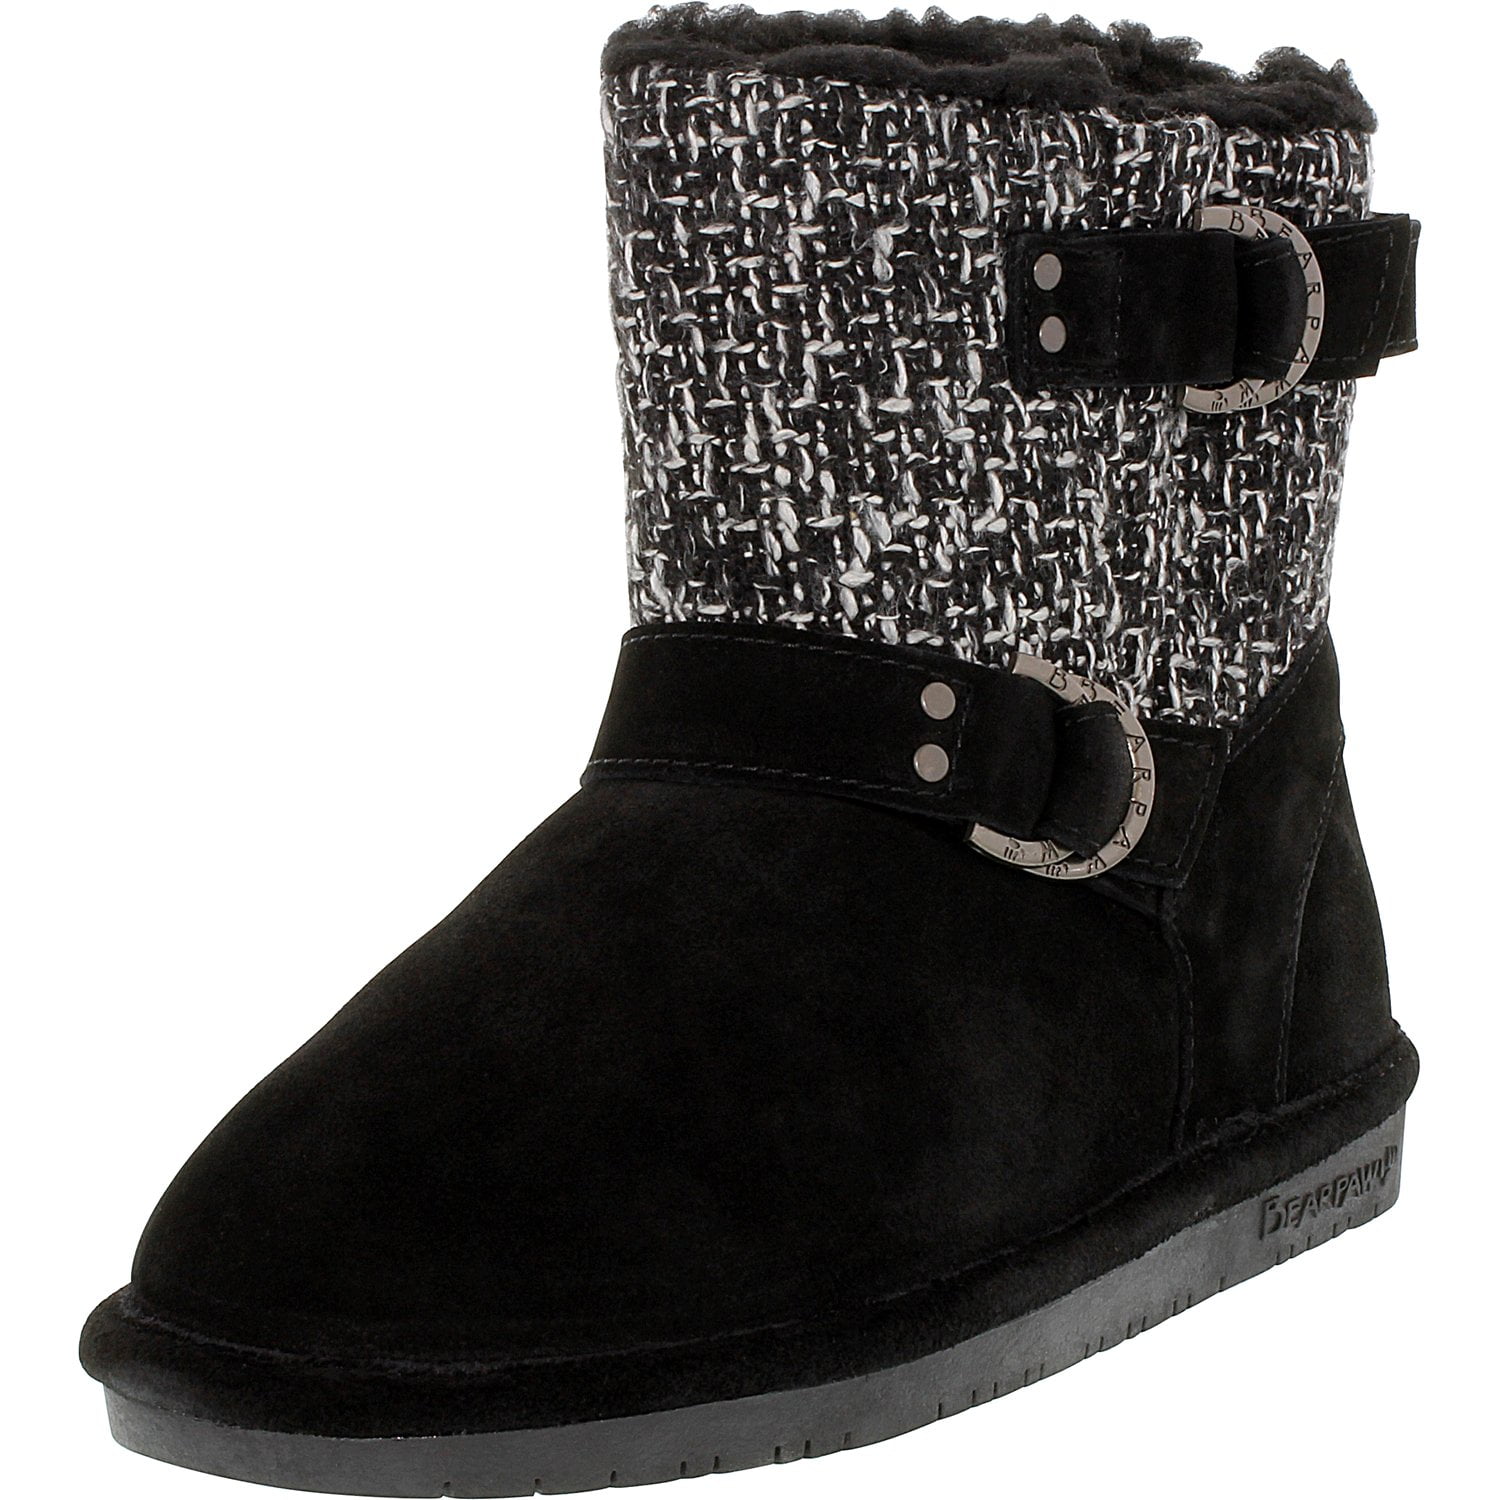 Ankle-High Suede Boot - 6M | Walmart Canada